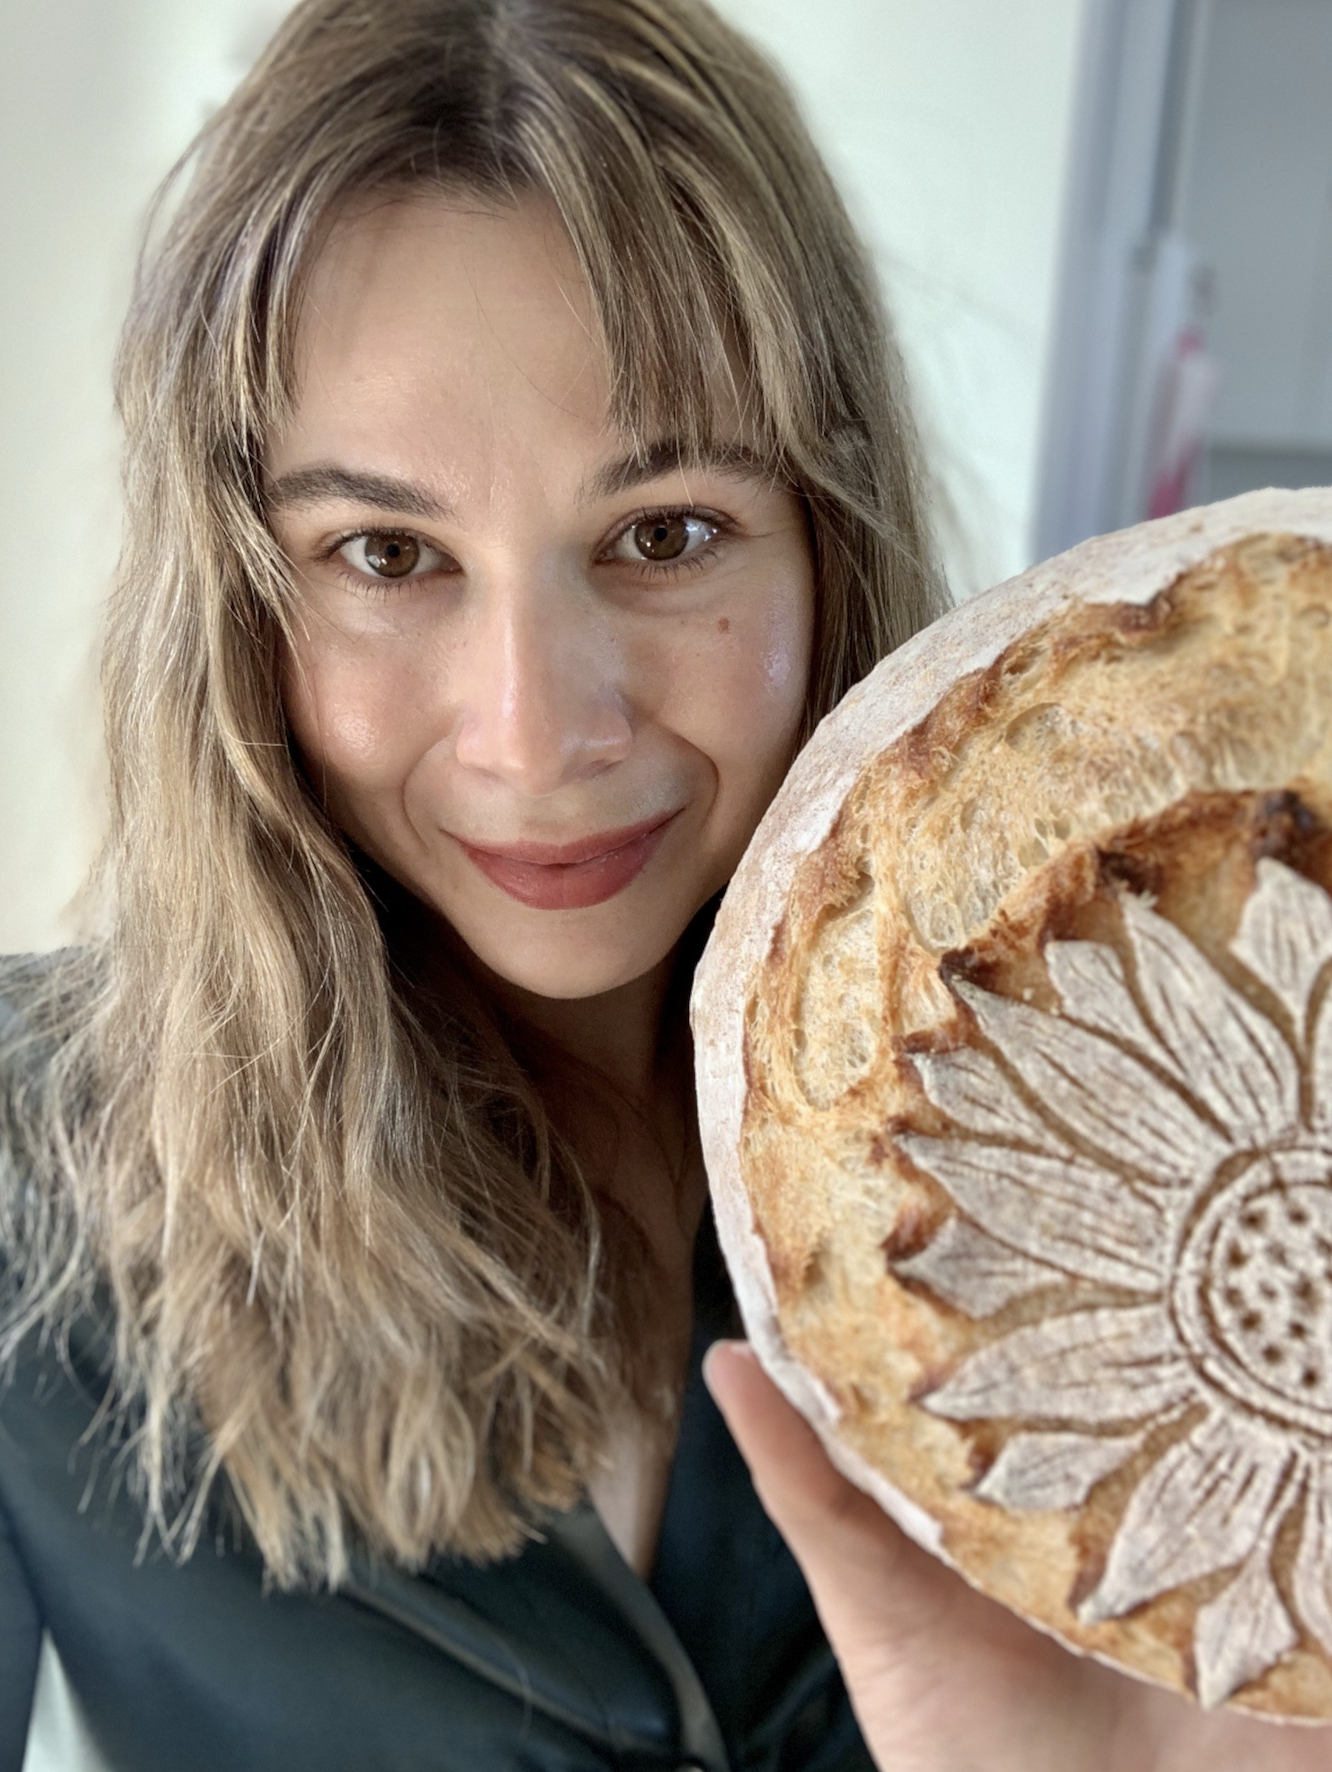 sourdough bread instagram social media influencer content creator on vancouver island in british columbia canada Jaimie from @TheSourdoughFlourist 5